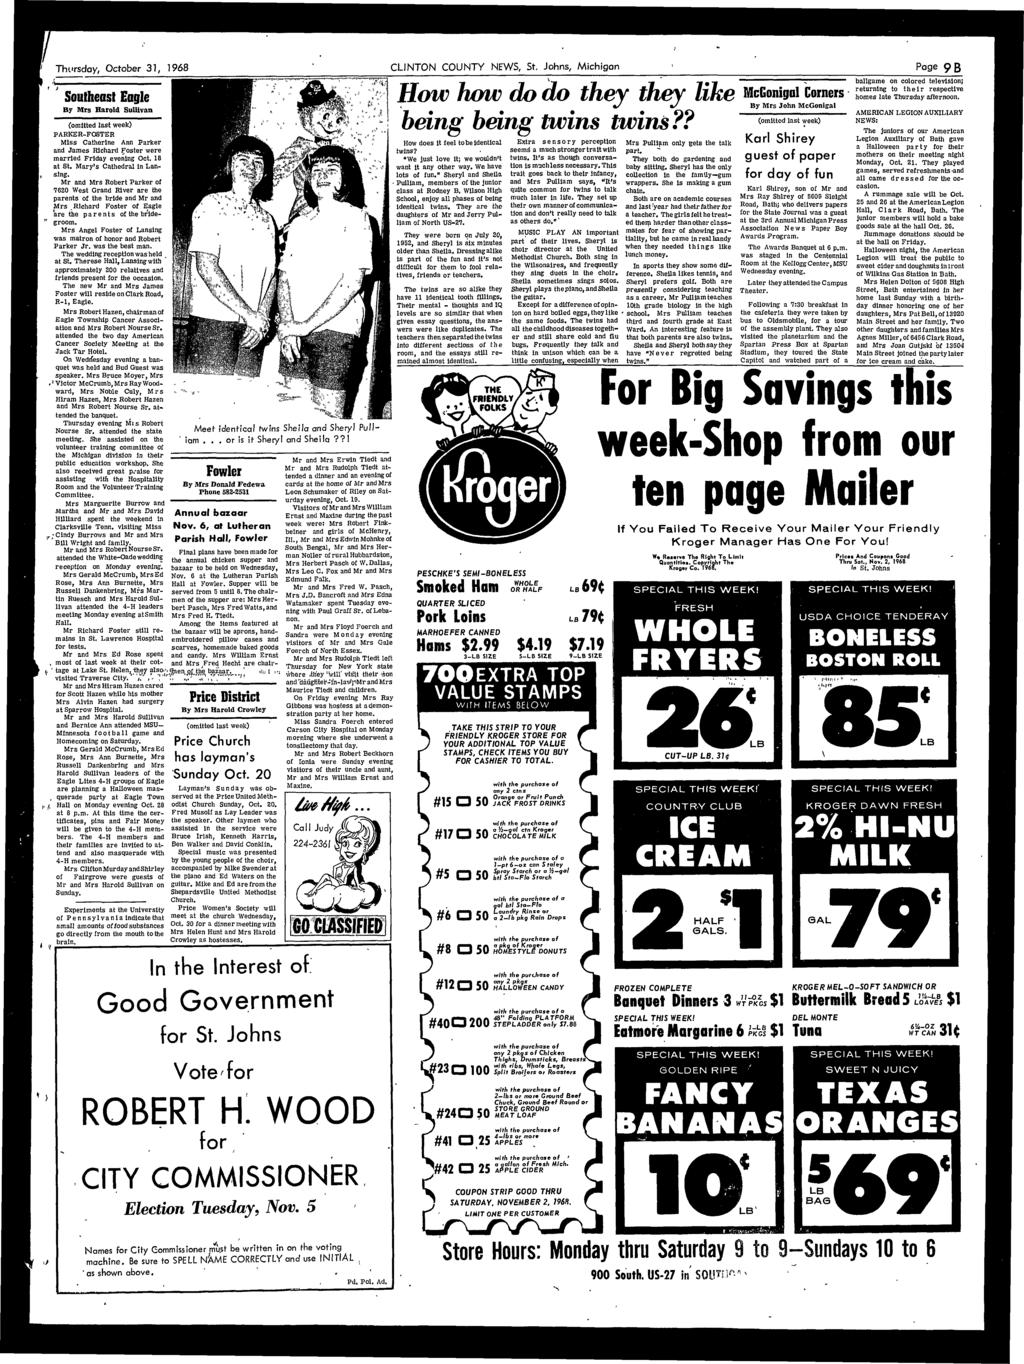 Thursday, October 31, 1968 Southeast Eagle By Mrs Harold Sullvan (omtted last week) PARKER-POSTER Mss Catherne Ann Parker and James Rchard Poster were marred Frday evenng Oct. 18 at St.